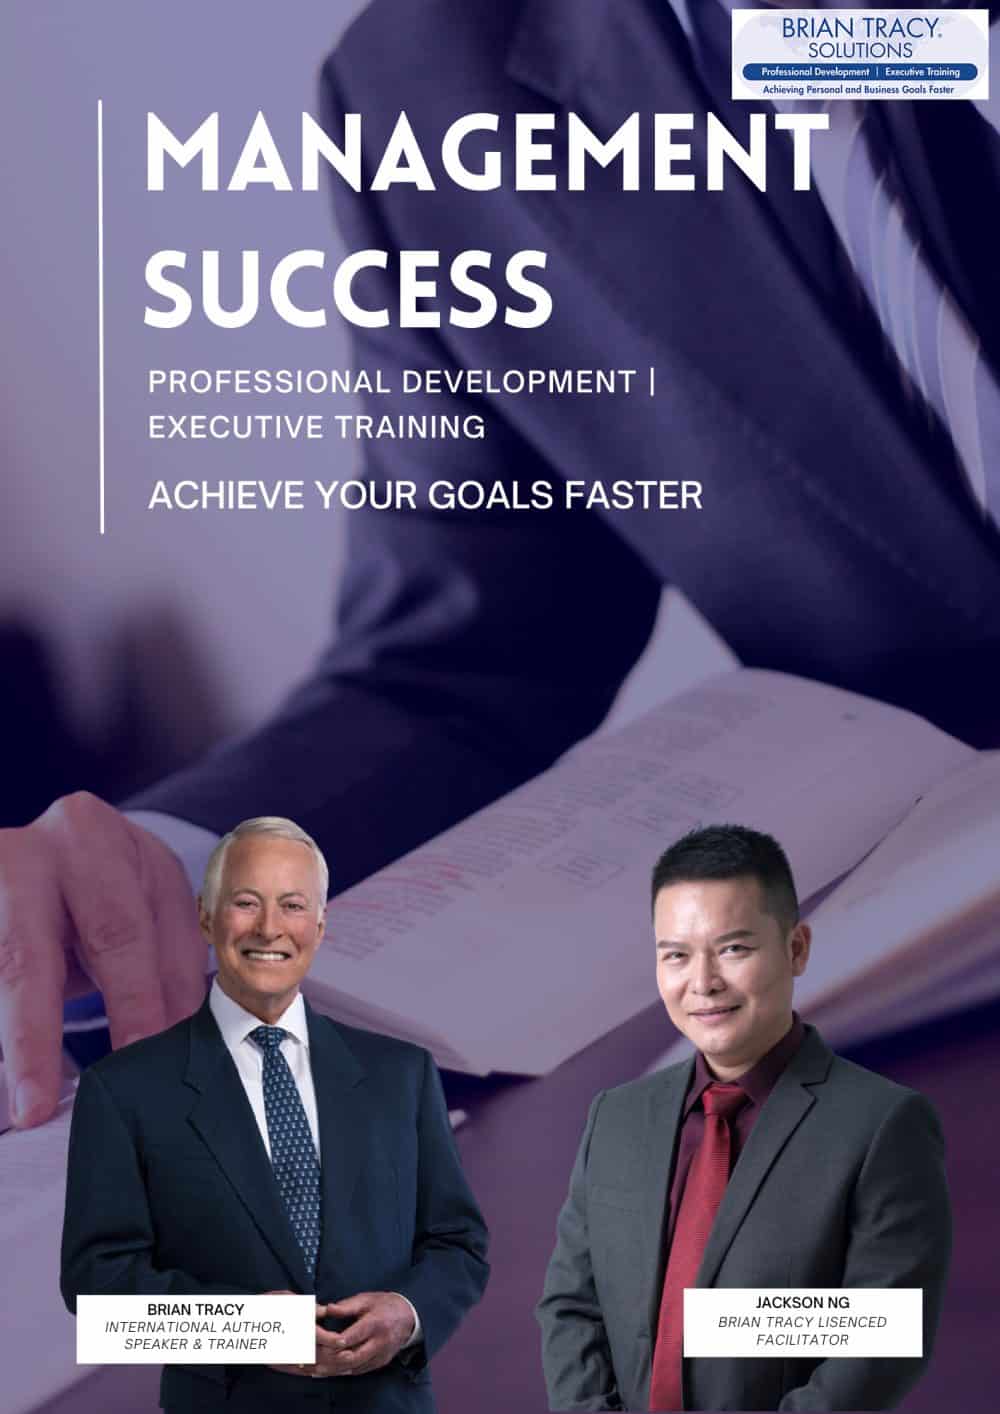 Management Success By Brian Tracy - Website Program